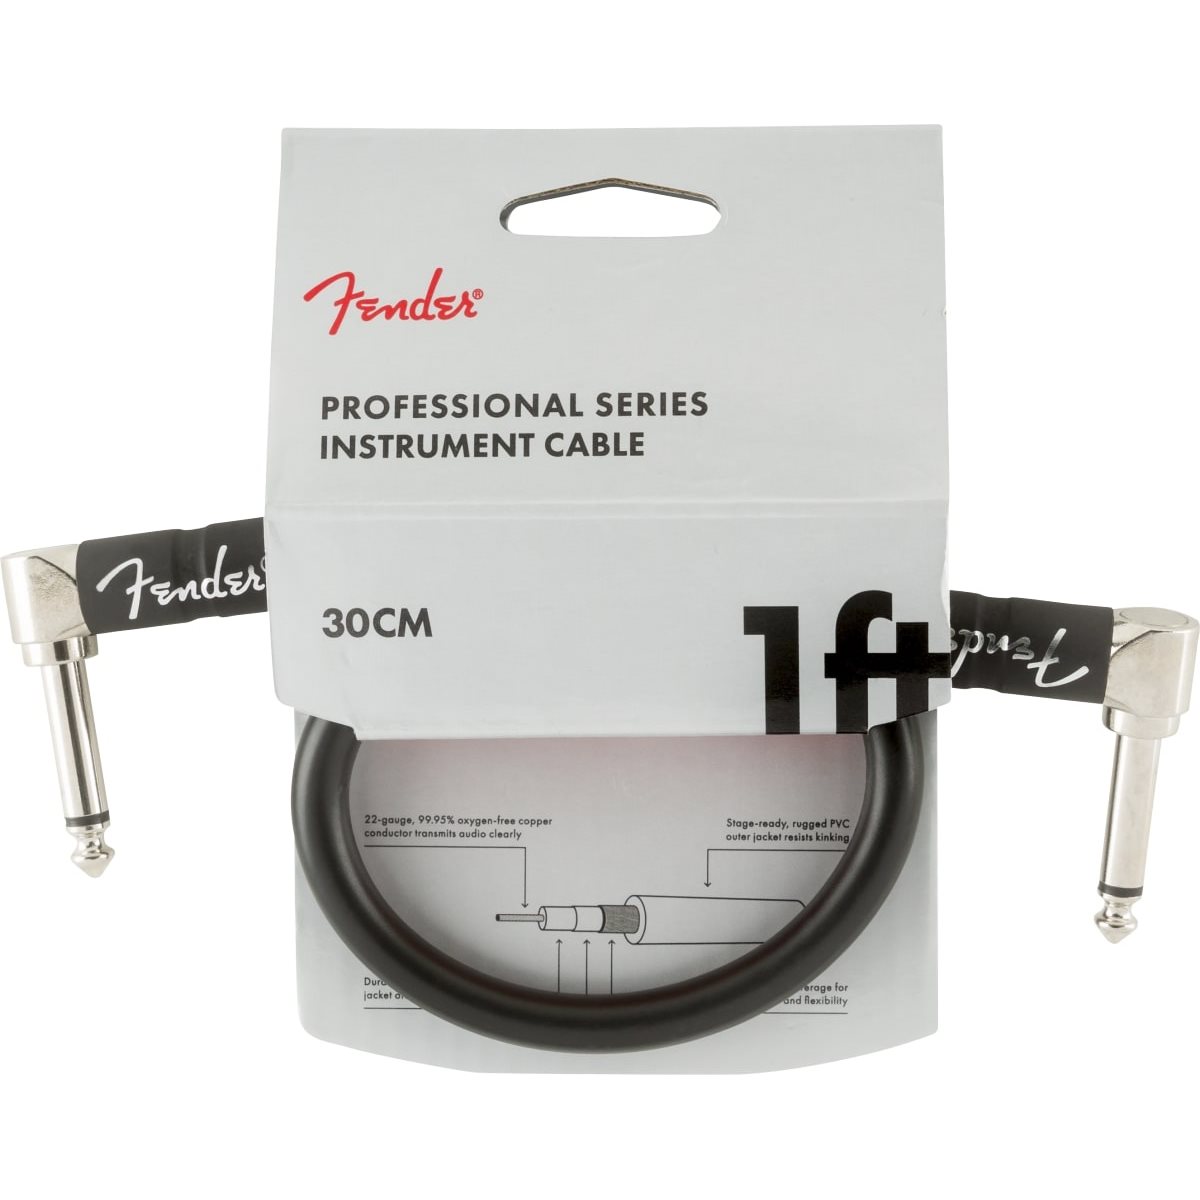 FENDER - PROFESSIONAL SERIES INSTRUMENT CABLE - ANGLED - 1'